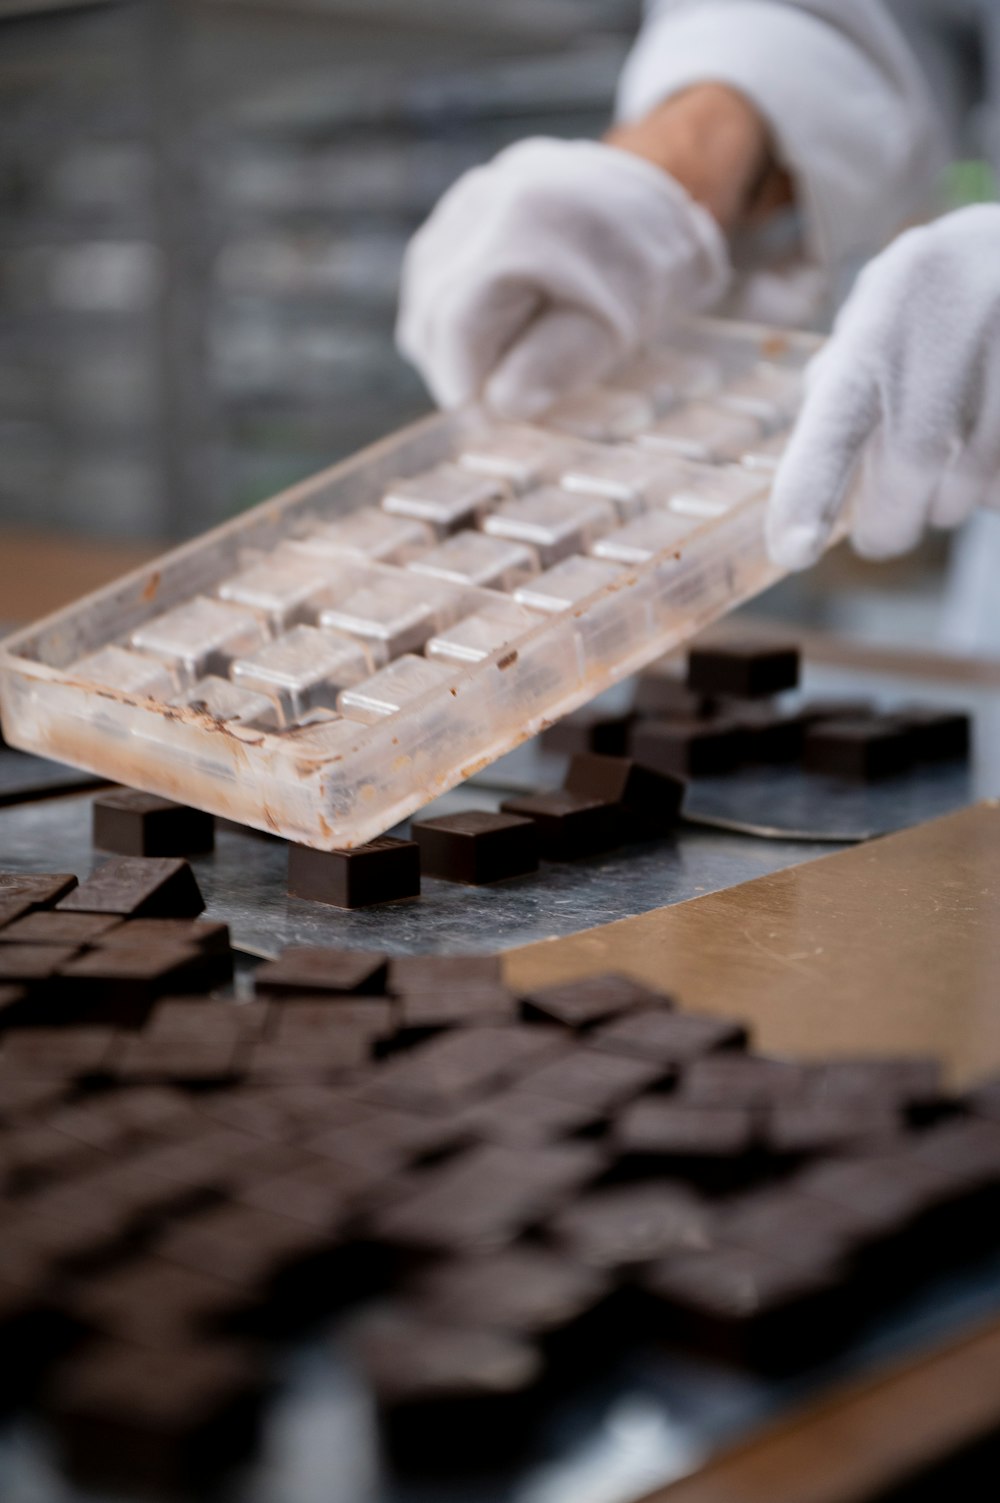 a person in white gloves and gloves working on a piece of chocolate